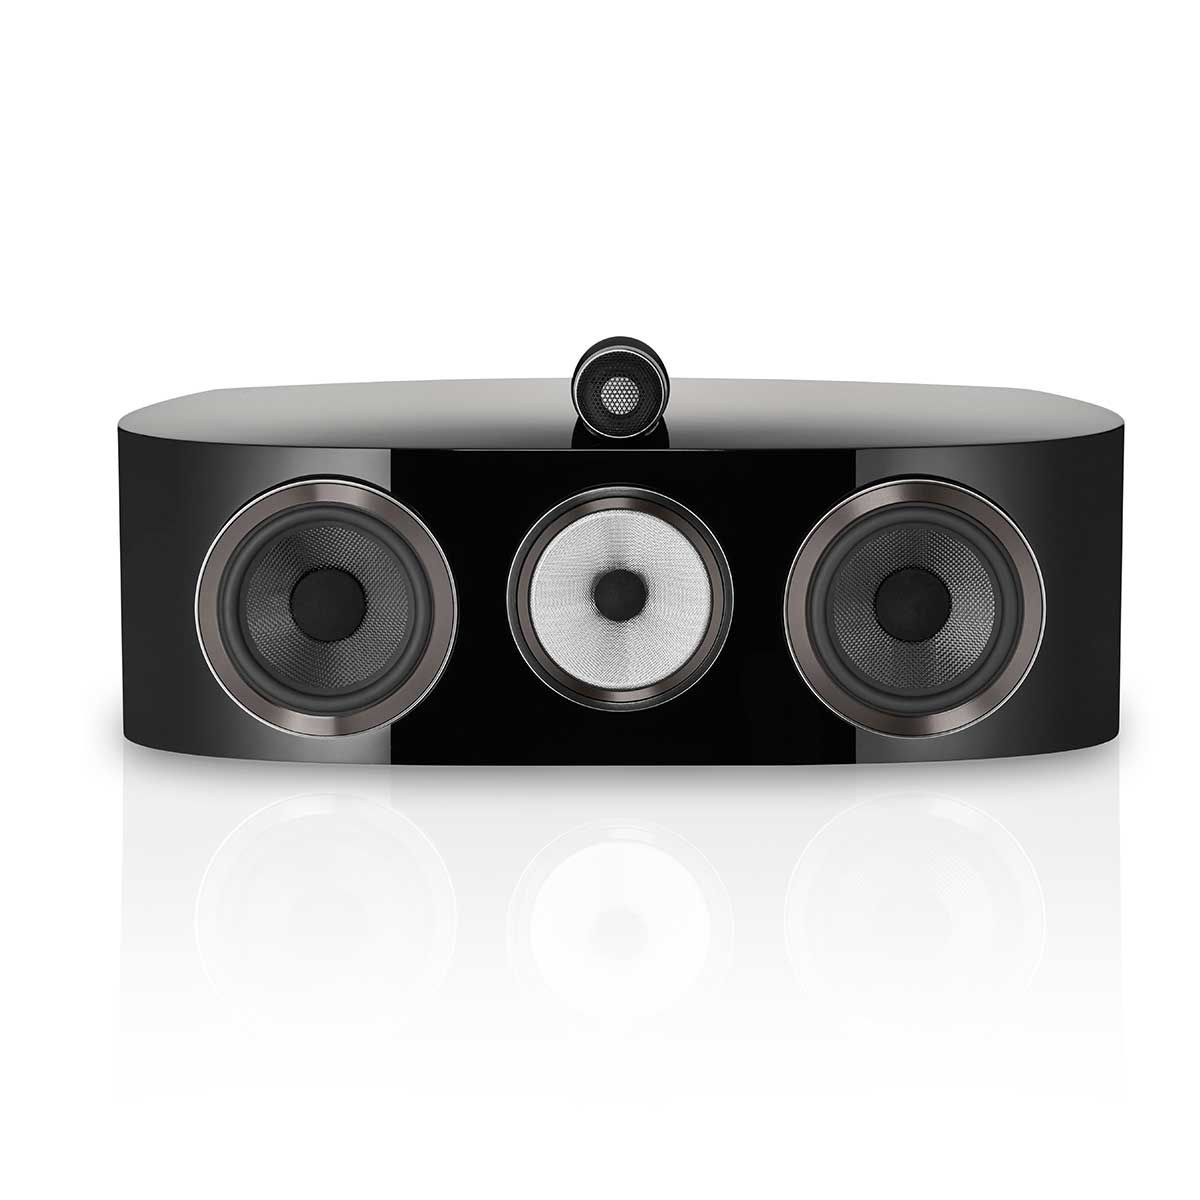 Bowers & Wilkins HTM82 D4 Center Channel Speaker, Gloss Black, front view without grille